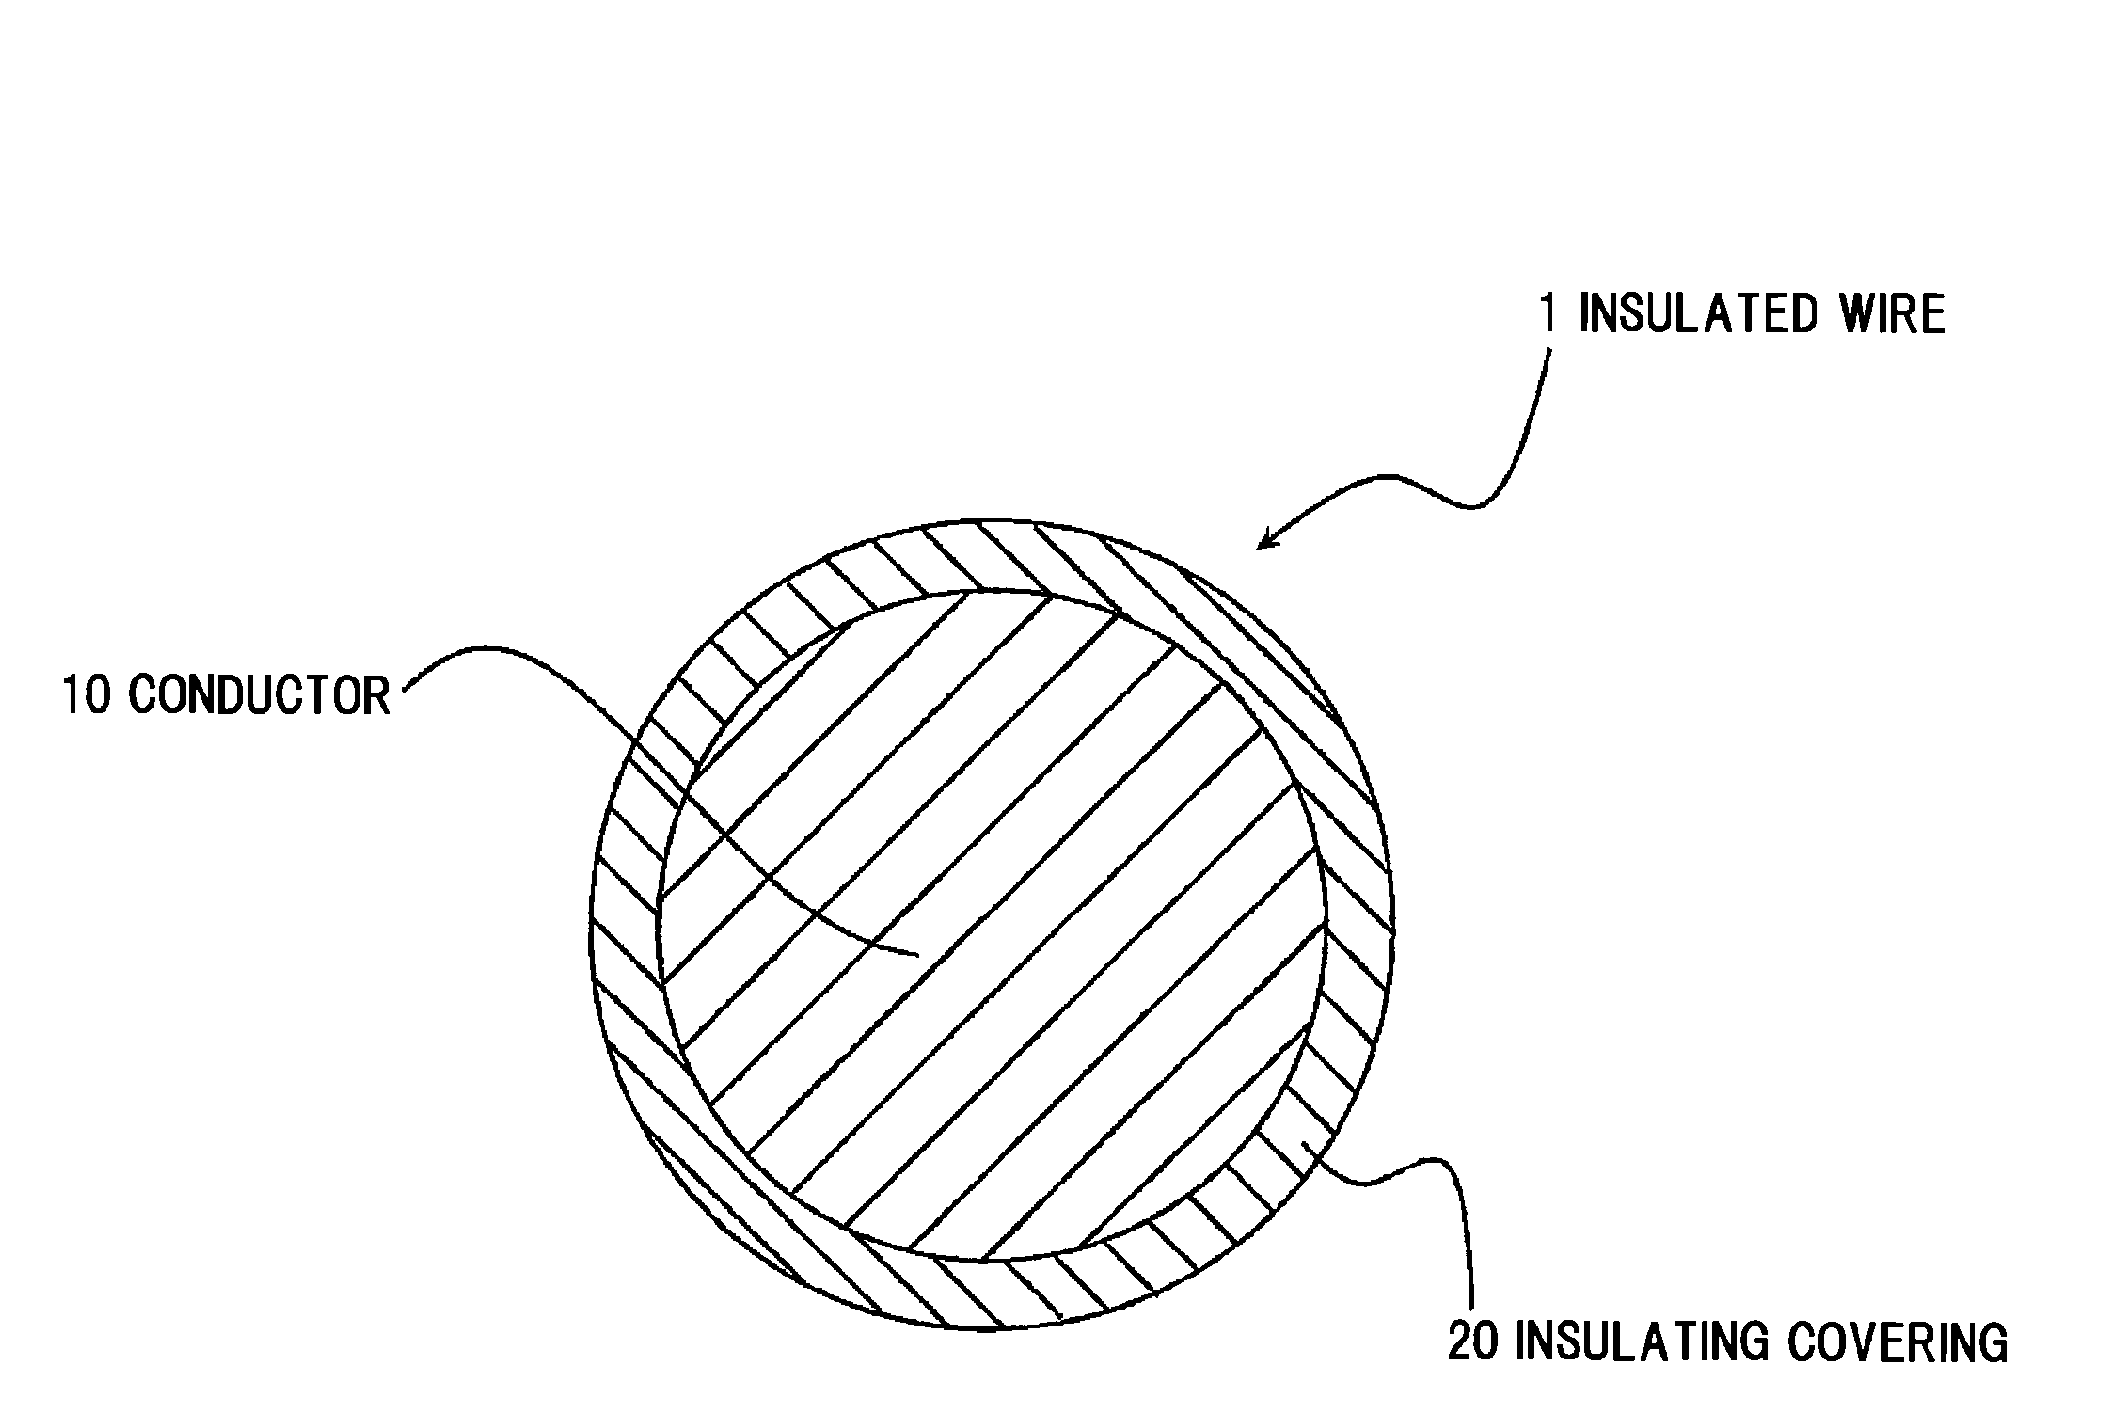 Insulating varnish and insulated wire